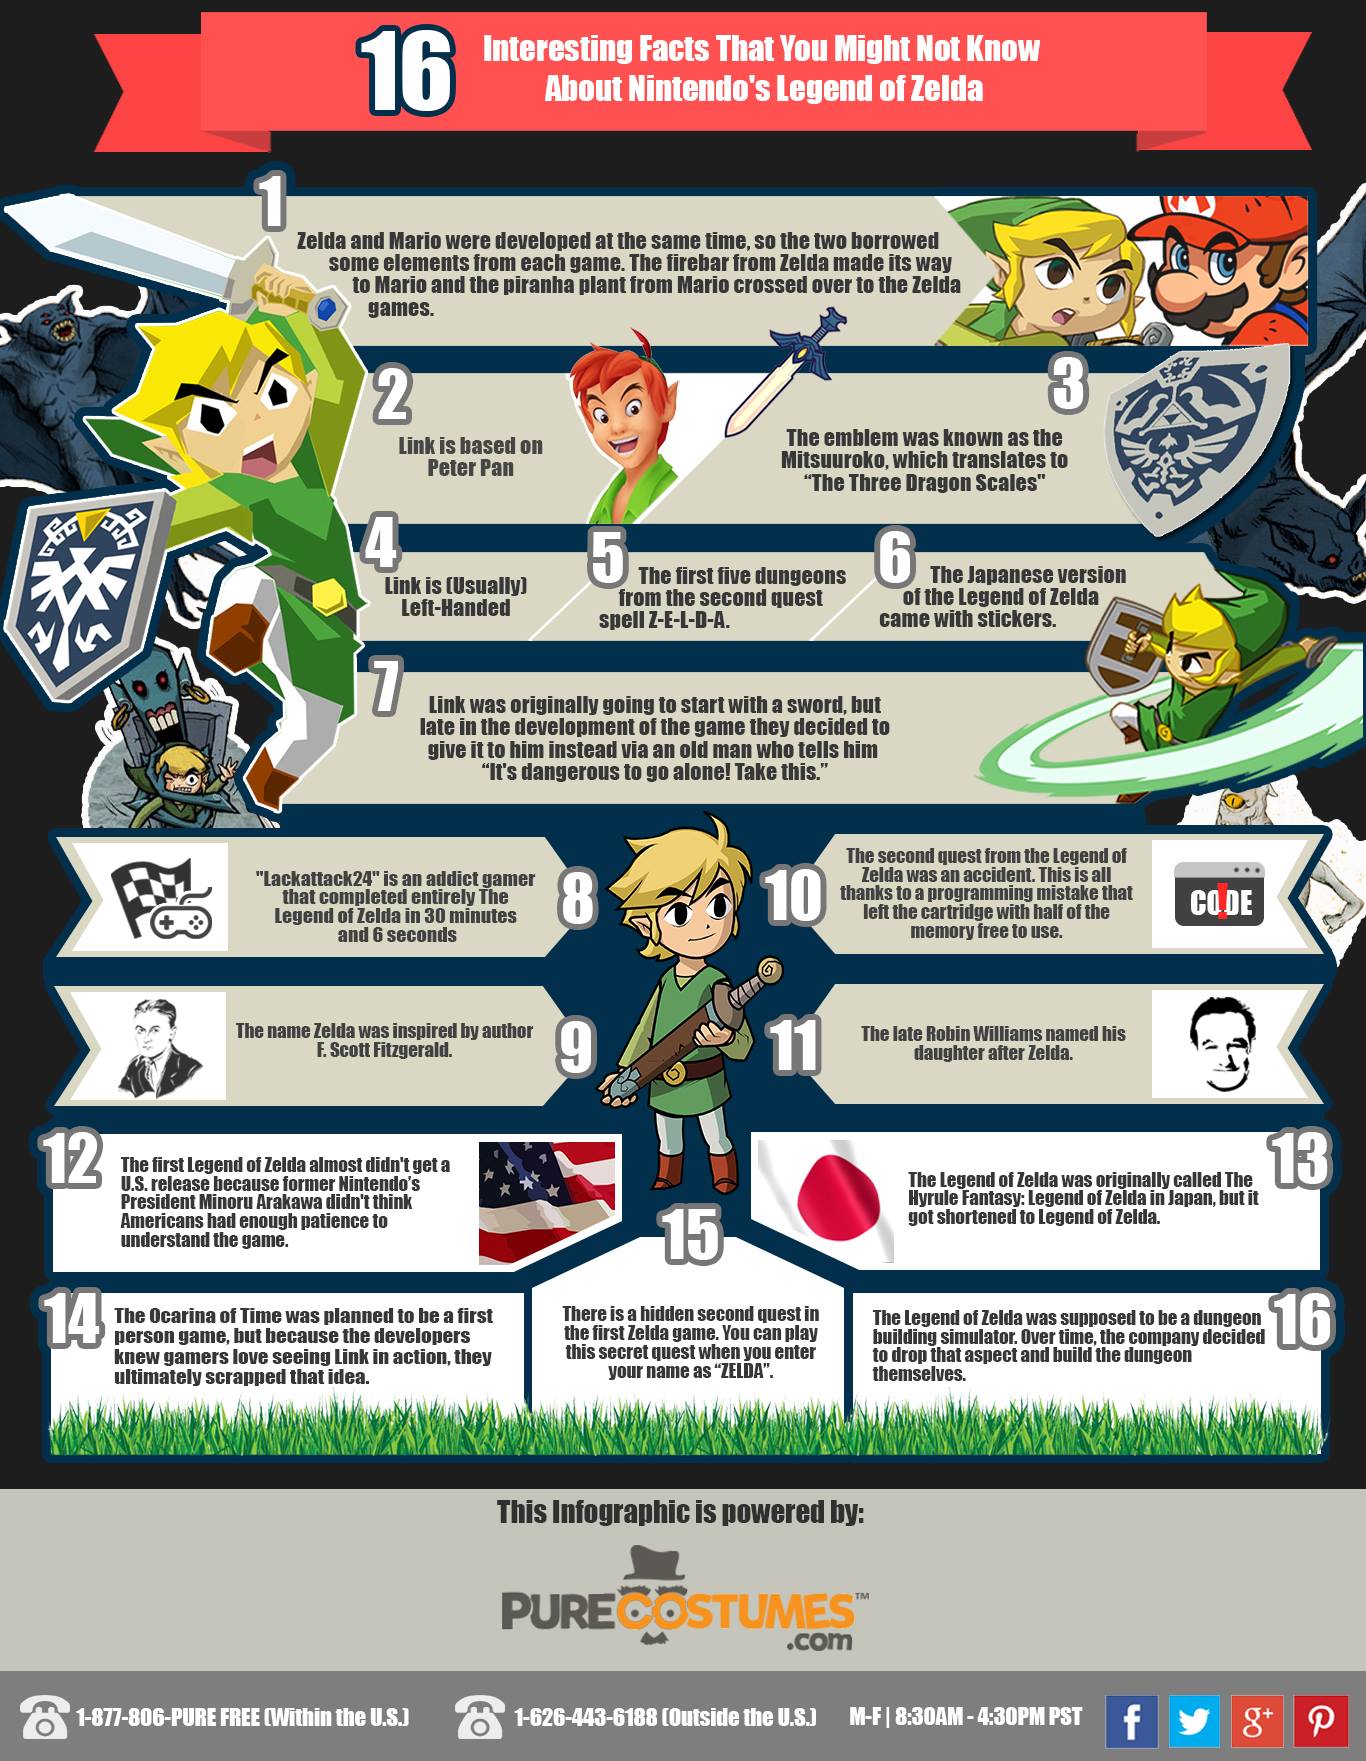 16 Facts You Might Not Know of Zelda